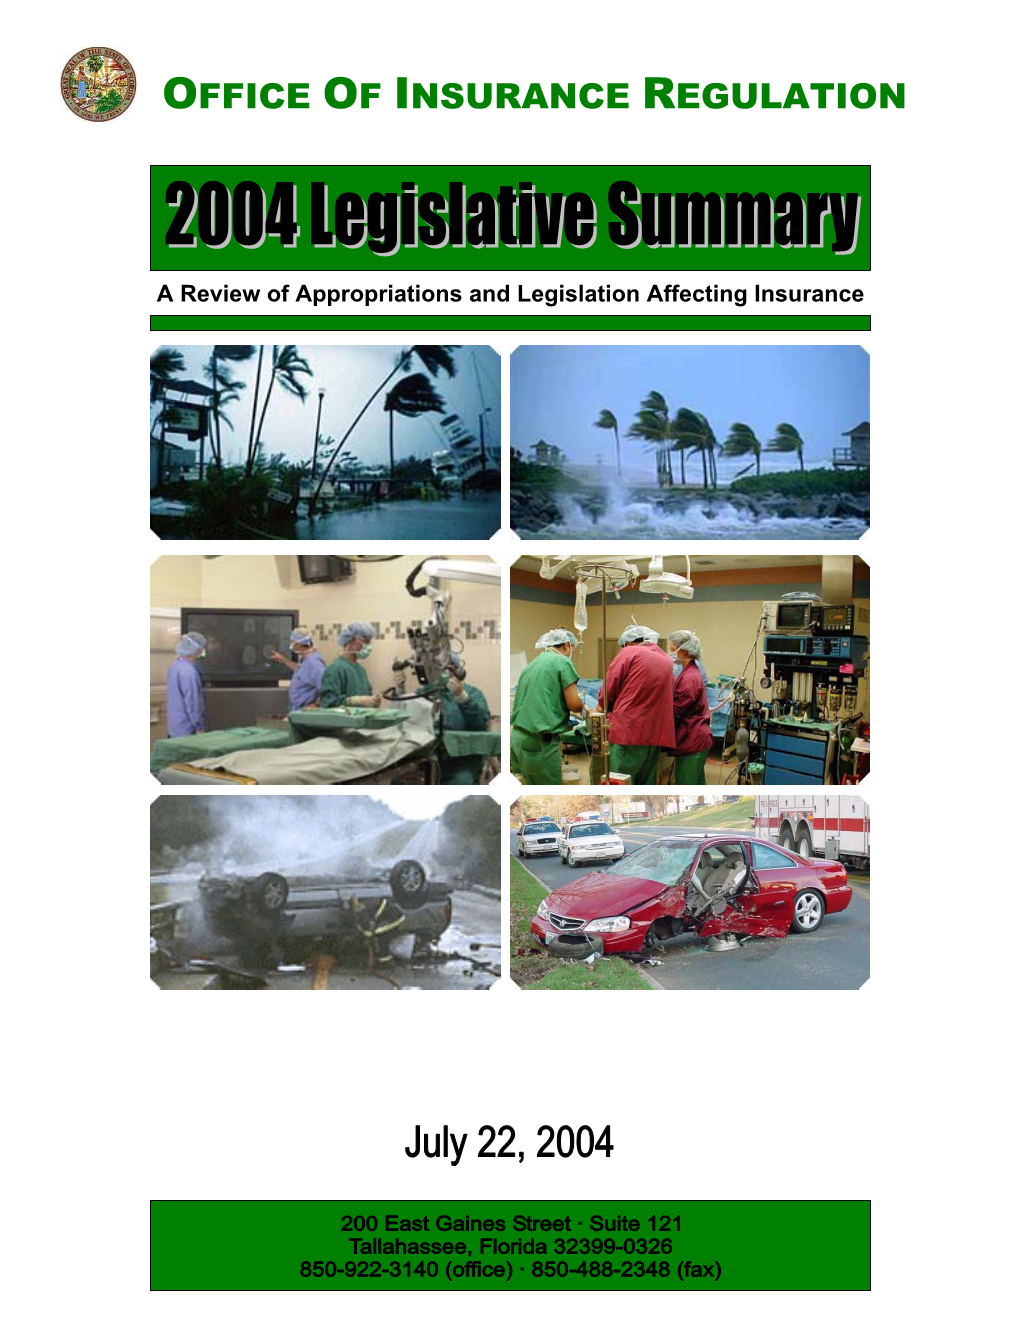 2004 Legislative Summary” Provides You with a Comprehensive Summary of Substantive Bills and Legislative Appropriations Affecting the Office